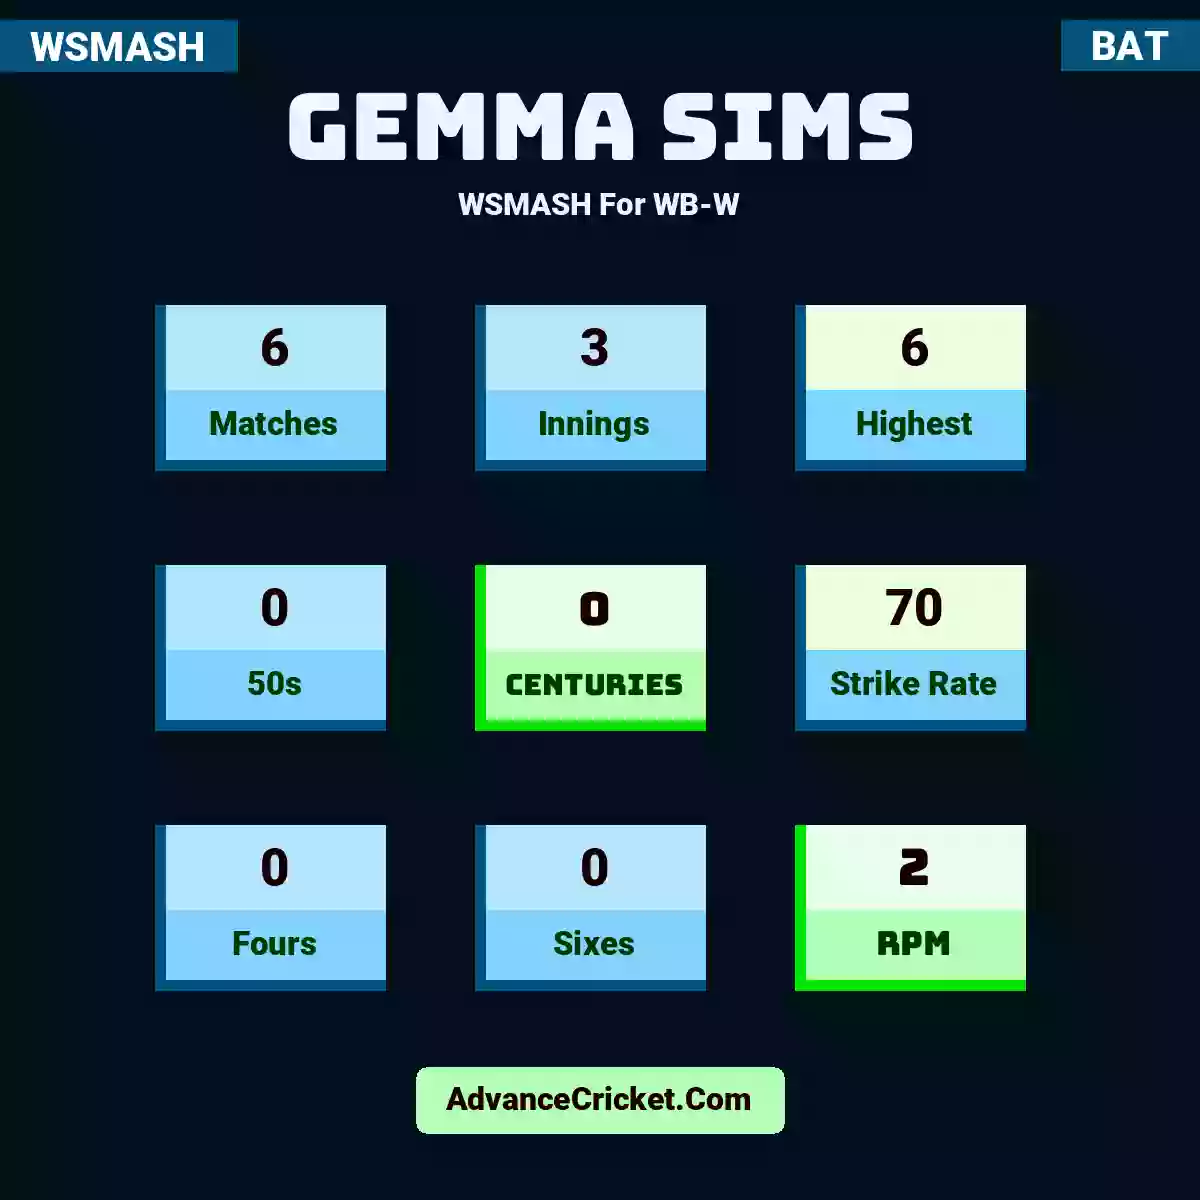 Gemma Sims WSMASH  For WB-W, Gemma Sims played 6 matches, scored 6 runs as highest, 0 half-centuries, and 0 centuries, with a strike rate of 70. G.Sims hit 0 fours and 0 sixes, with an RPM of 2.